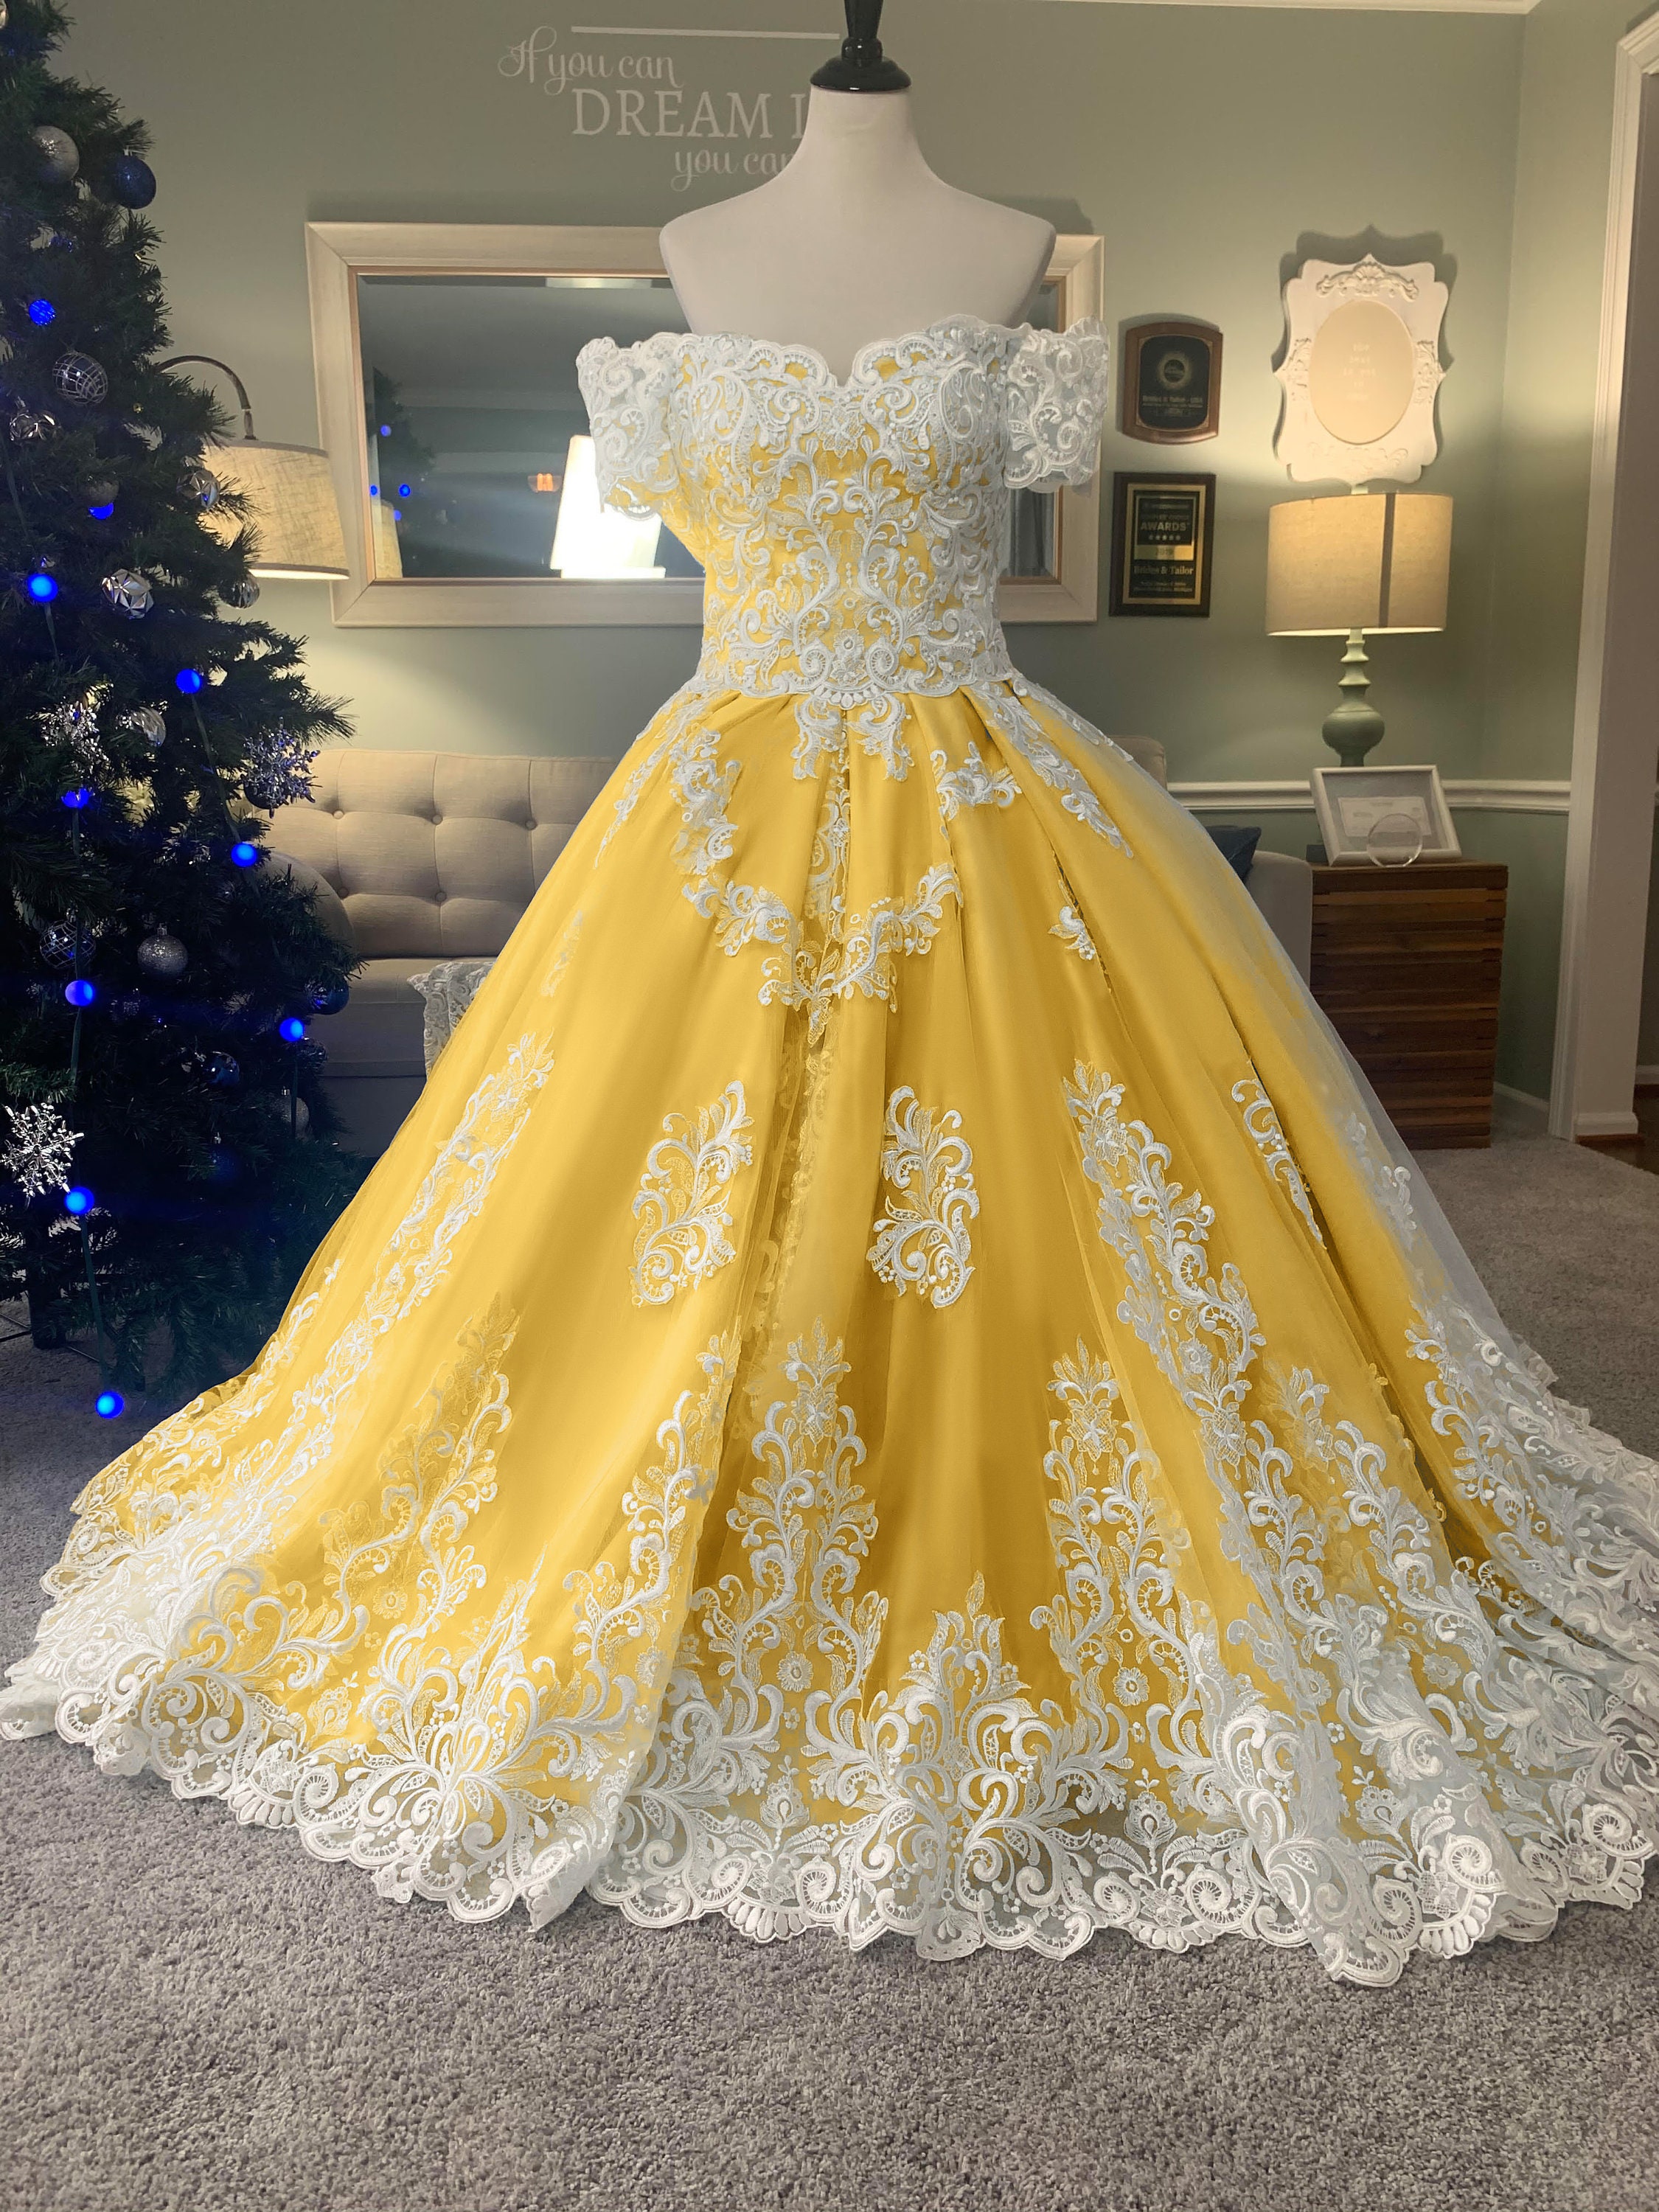 1930s yellow gown - Gem